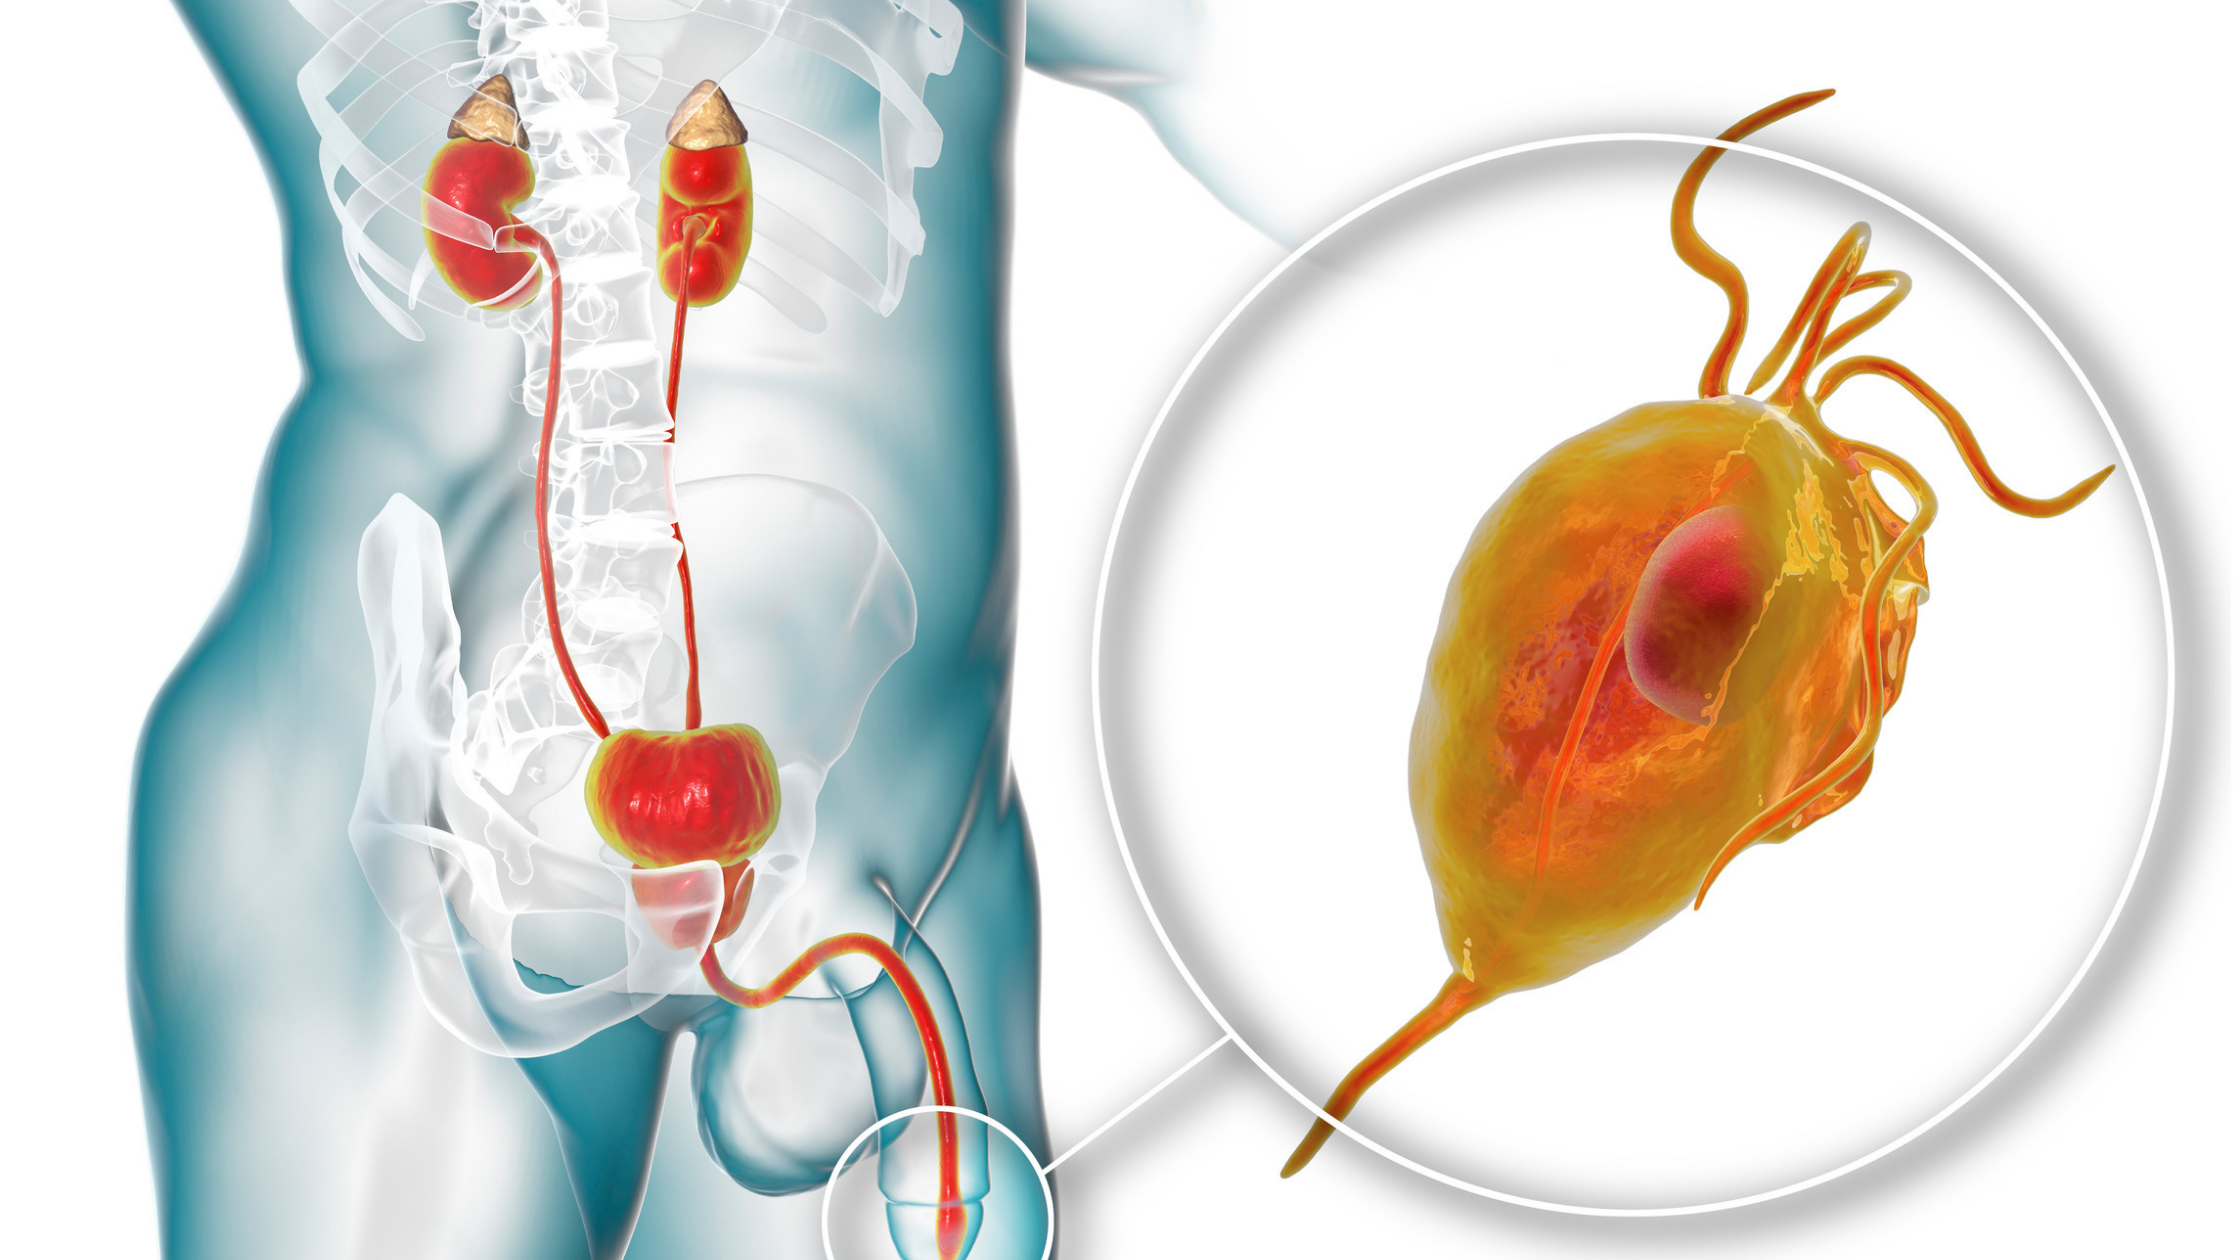 Transparent illustration of male with a highlighted focus on the prostate